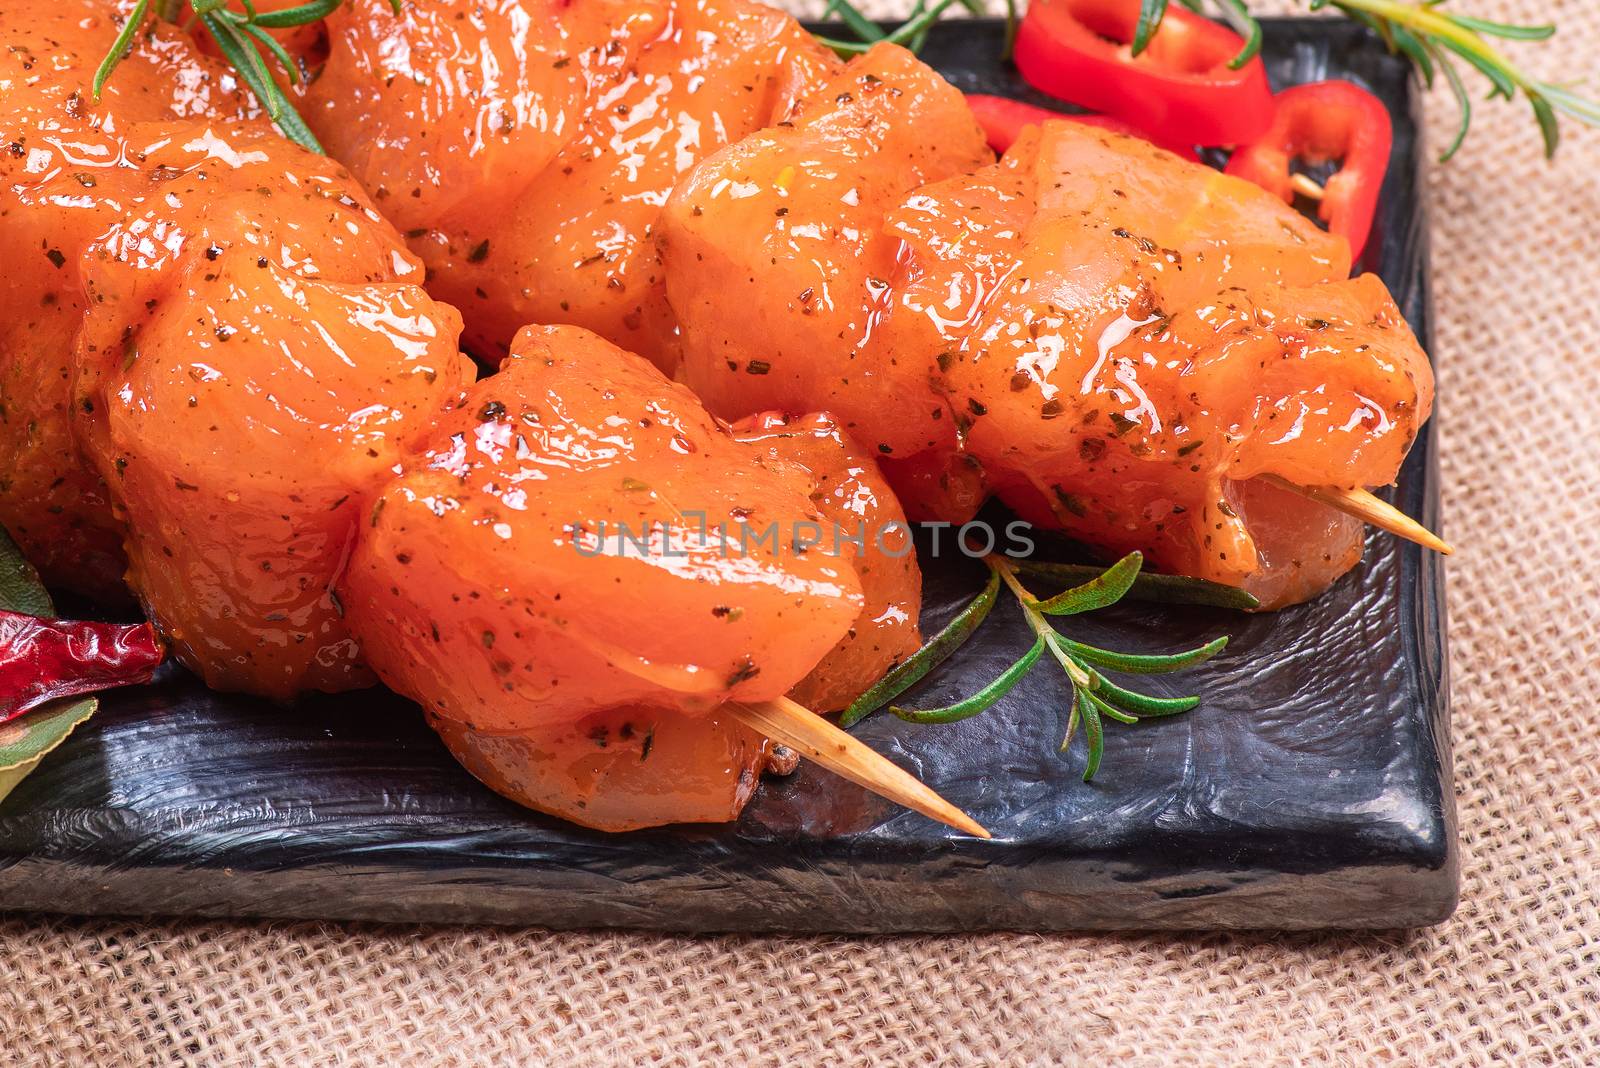 Raw marinated and spicy chicken skewers.Raw chicken skewers in marinade with spices on a black plate and on a wooden table. Top view. Chicken meat close up. Raw meat in marinade. Tasting diet meat. by nkooume